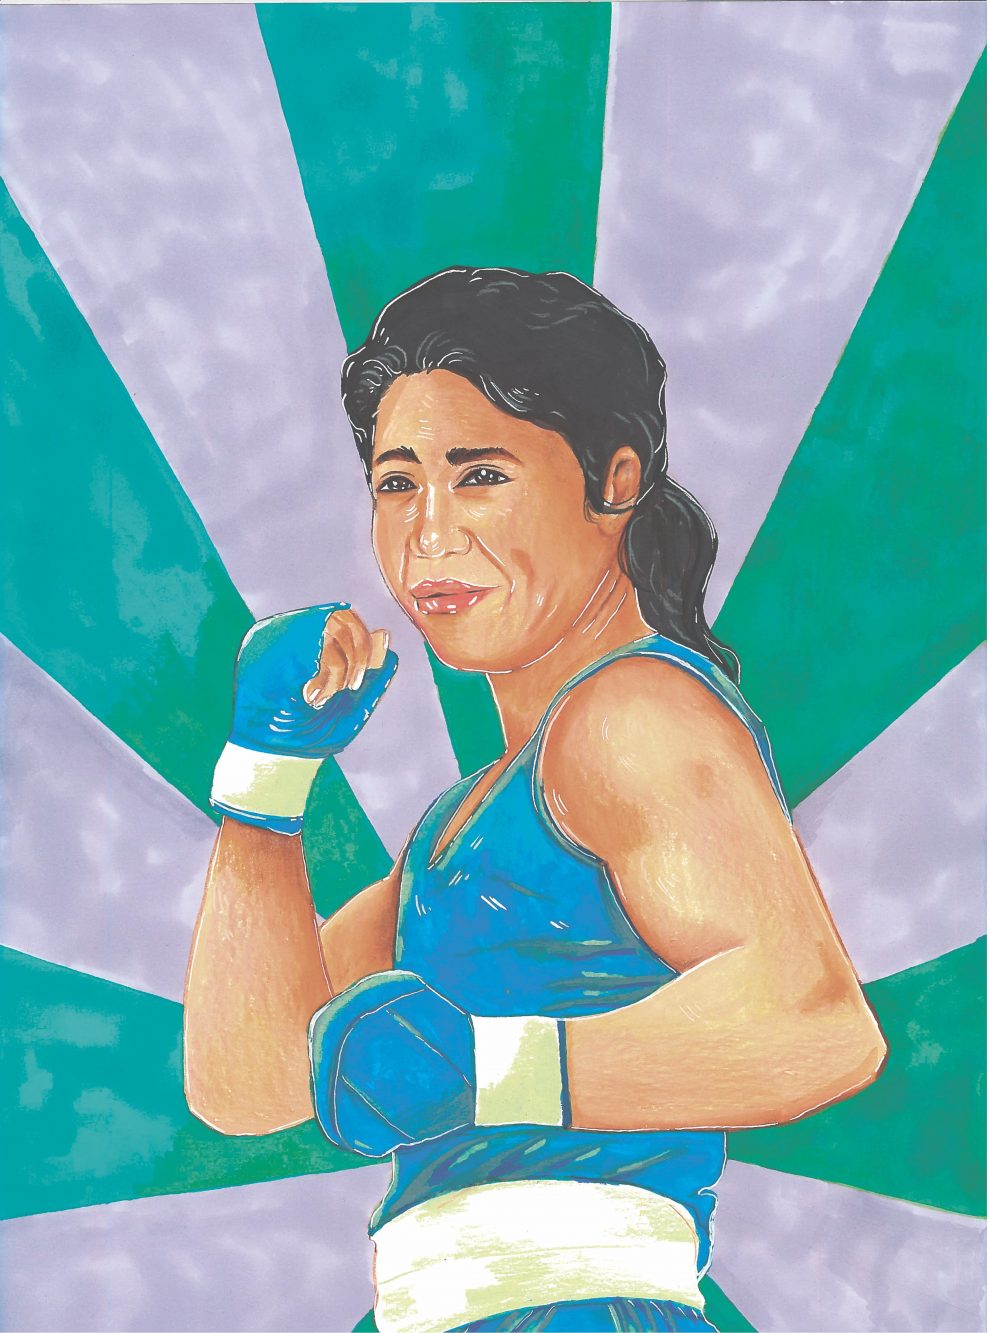 The Unforgettable Impact of Mary Kom